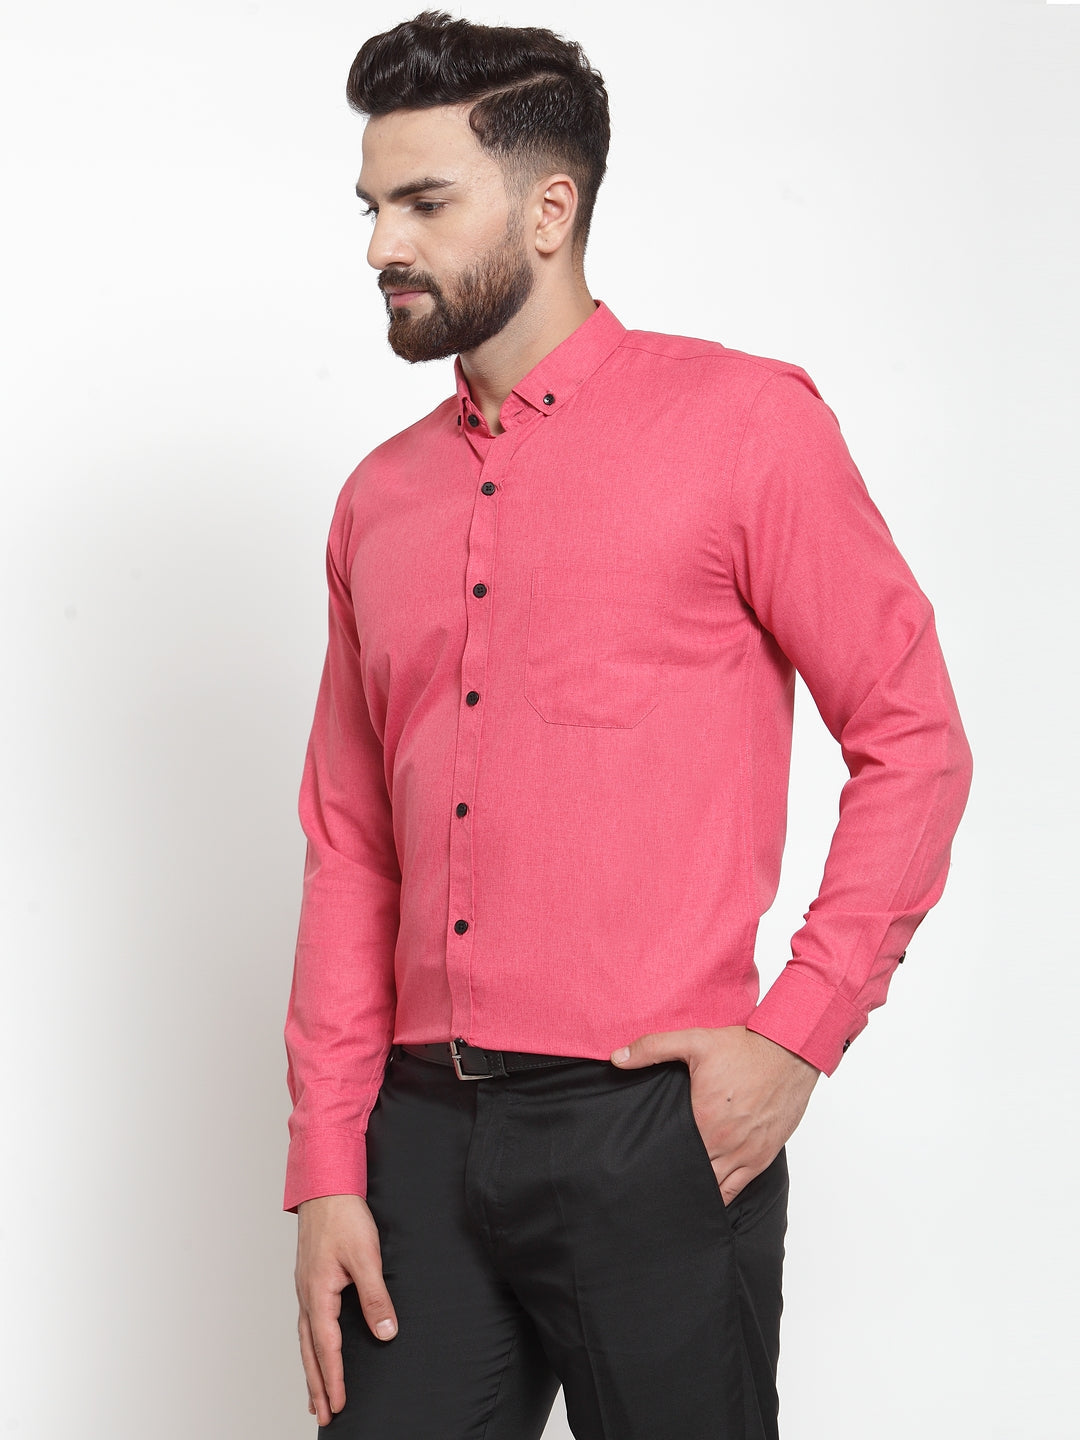 Men's Red Cotton Solid Button Down Formal Shirts ( SF 734Red ) - Jainish